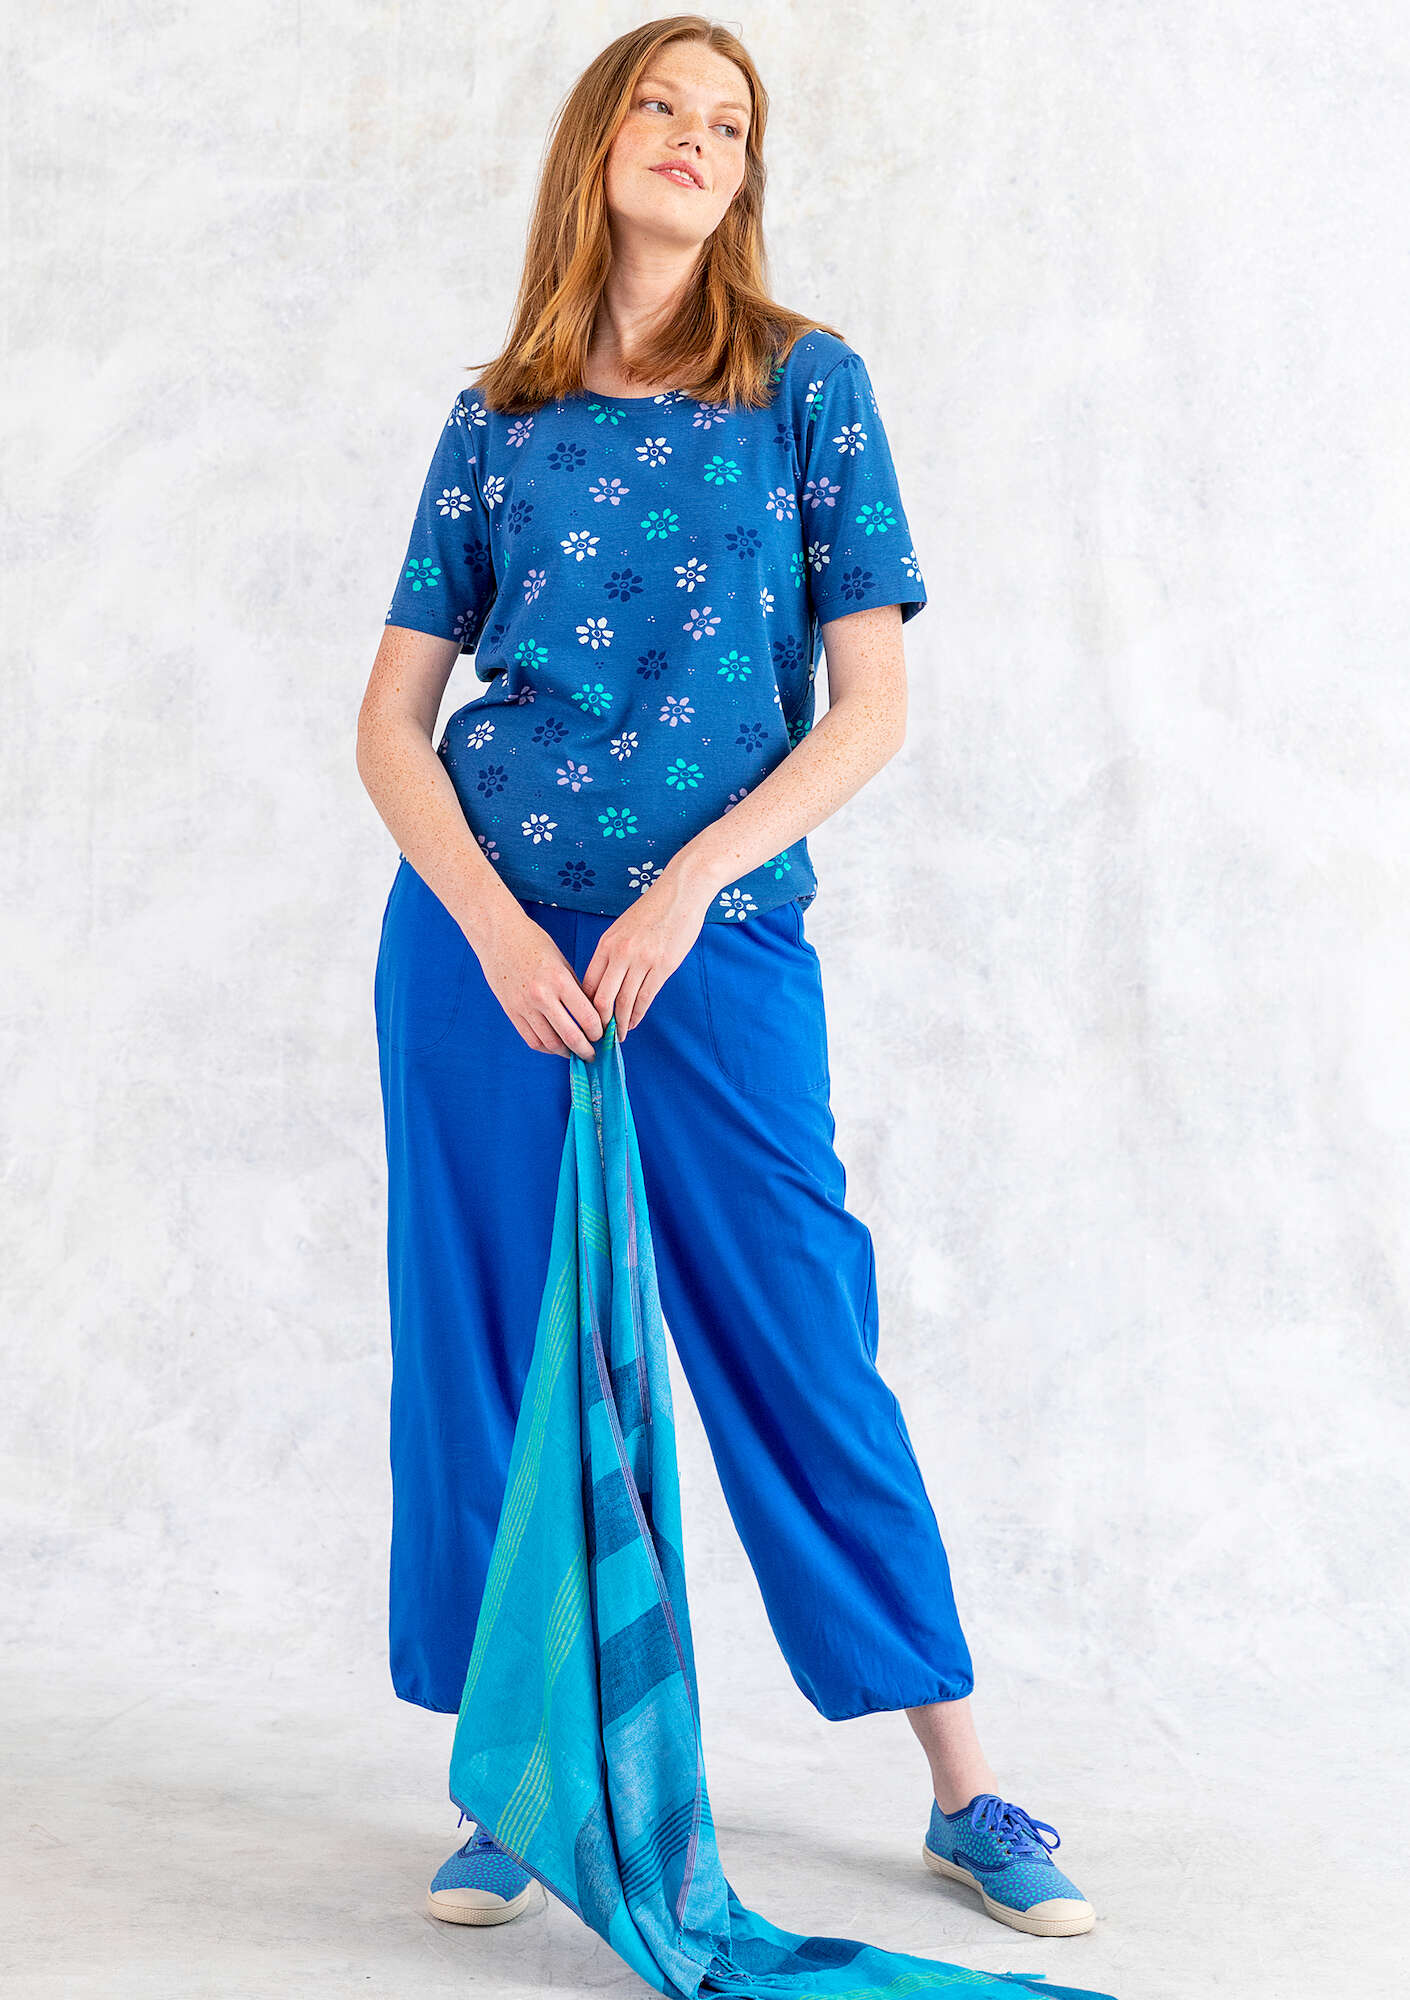 “Ester” T-shirt in organic cotton/spandex flax blue/patterned thumbnail